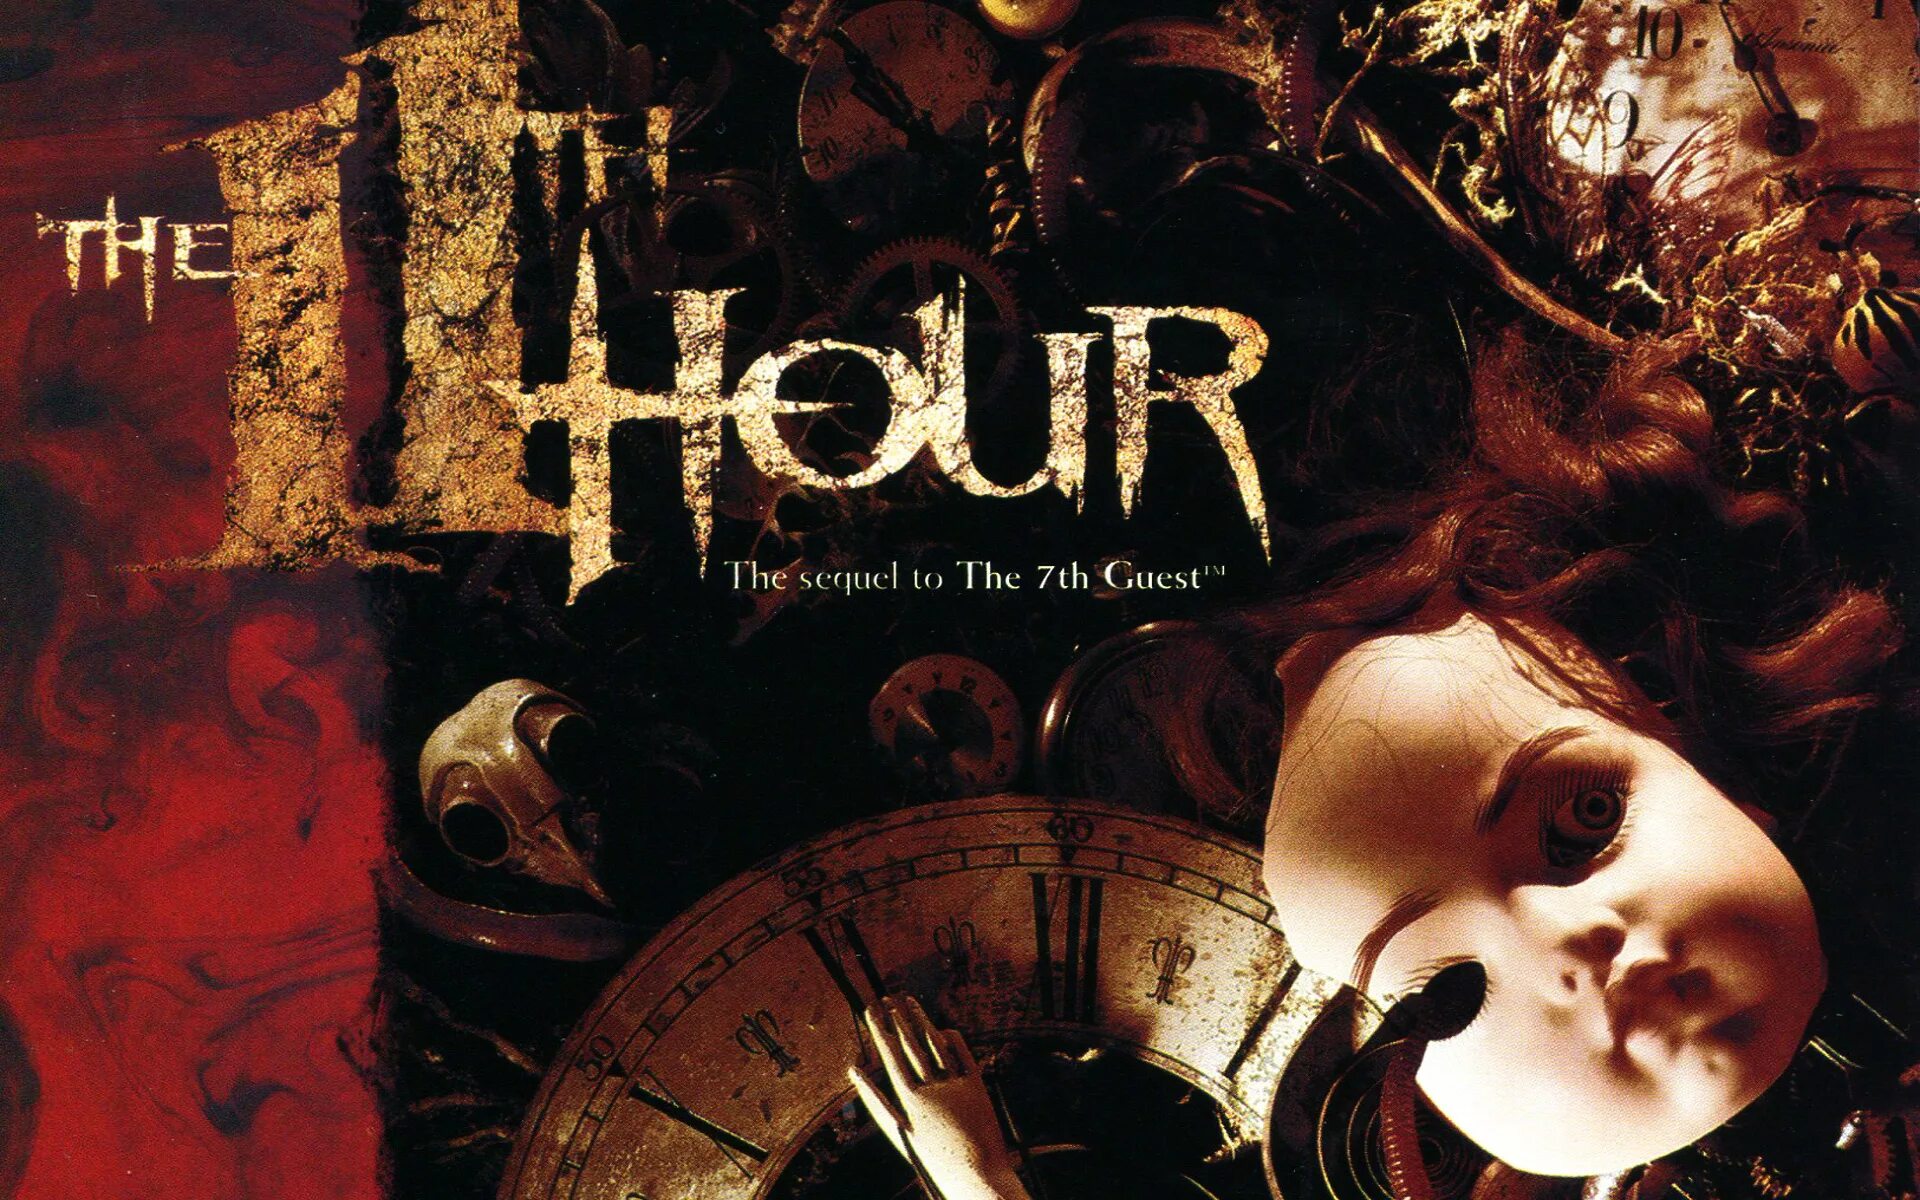 The hardest hour. 11 Hour игра. The 11th hour обложки. The 11th hour игра. The 11th hour Band.